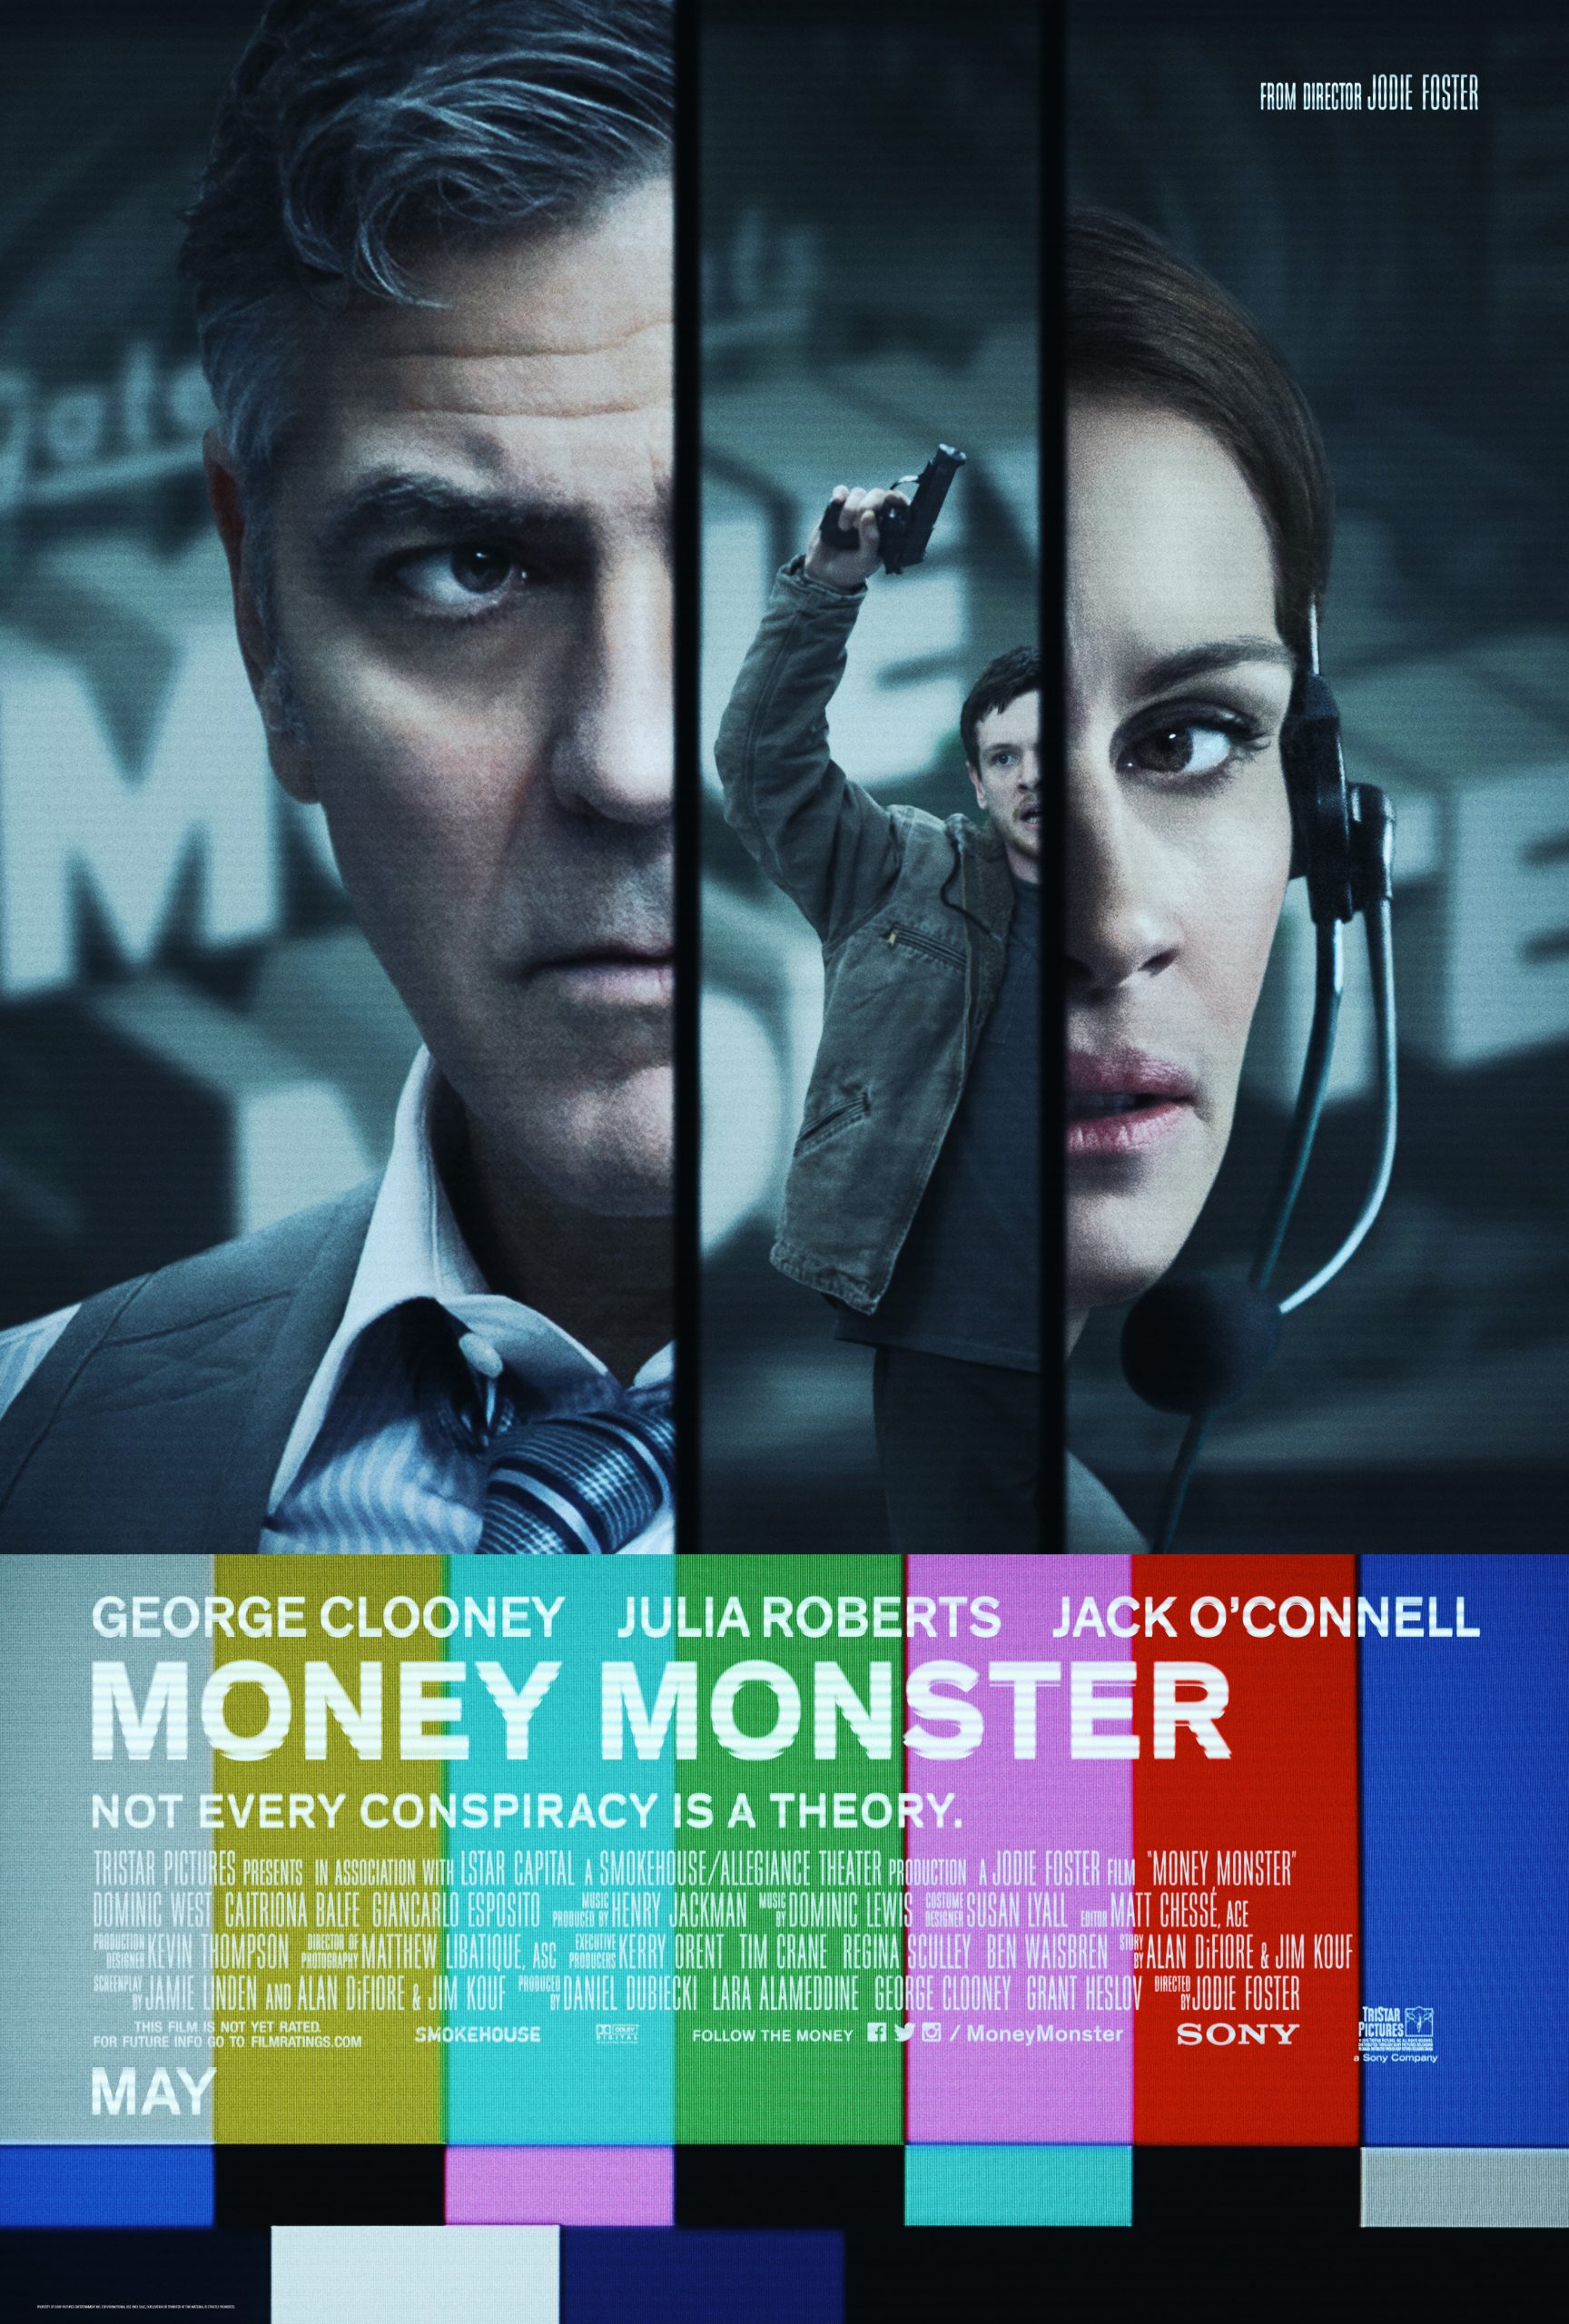 Money Monster (2016) เกมการเงิน นรกออนแอร์ George Clooney